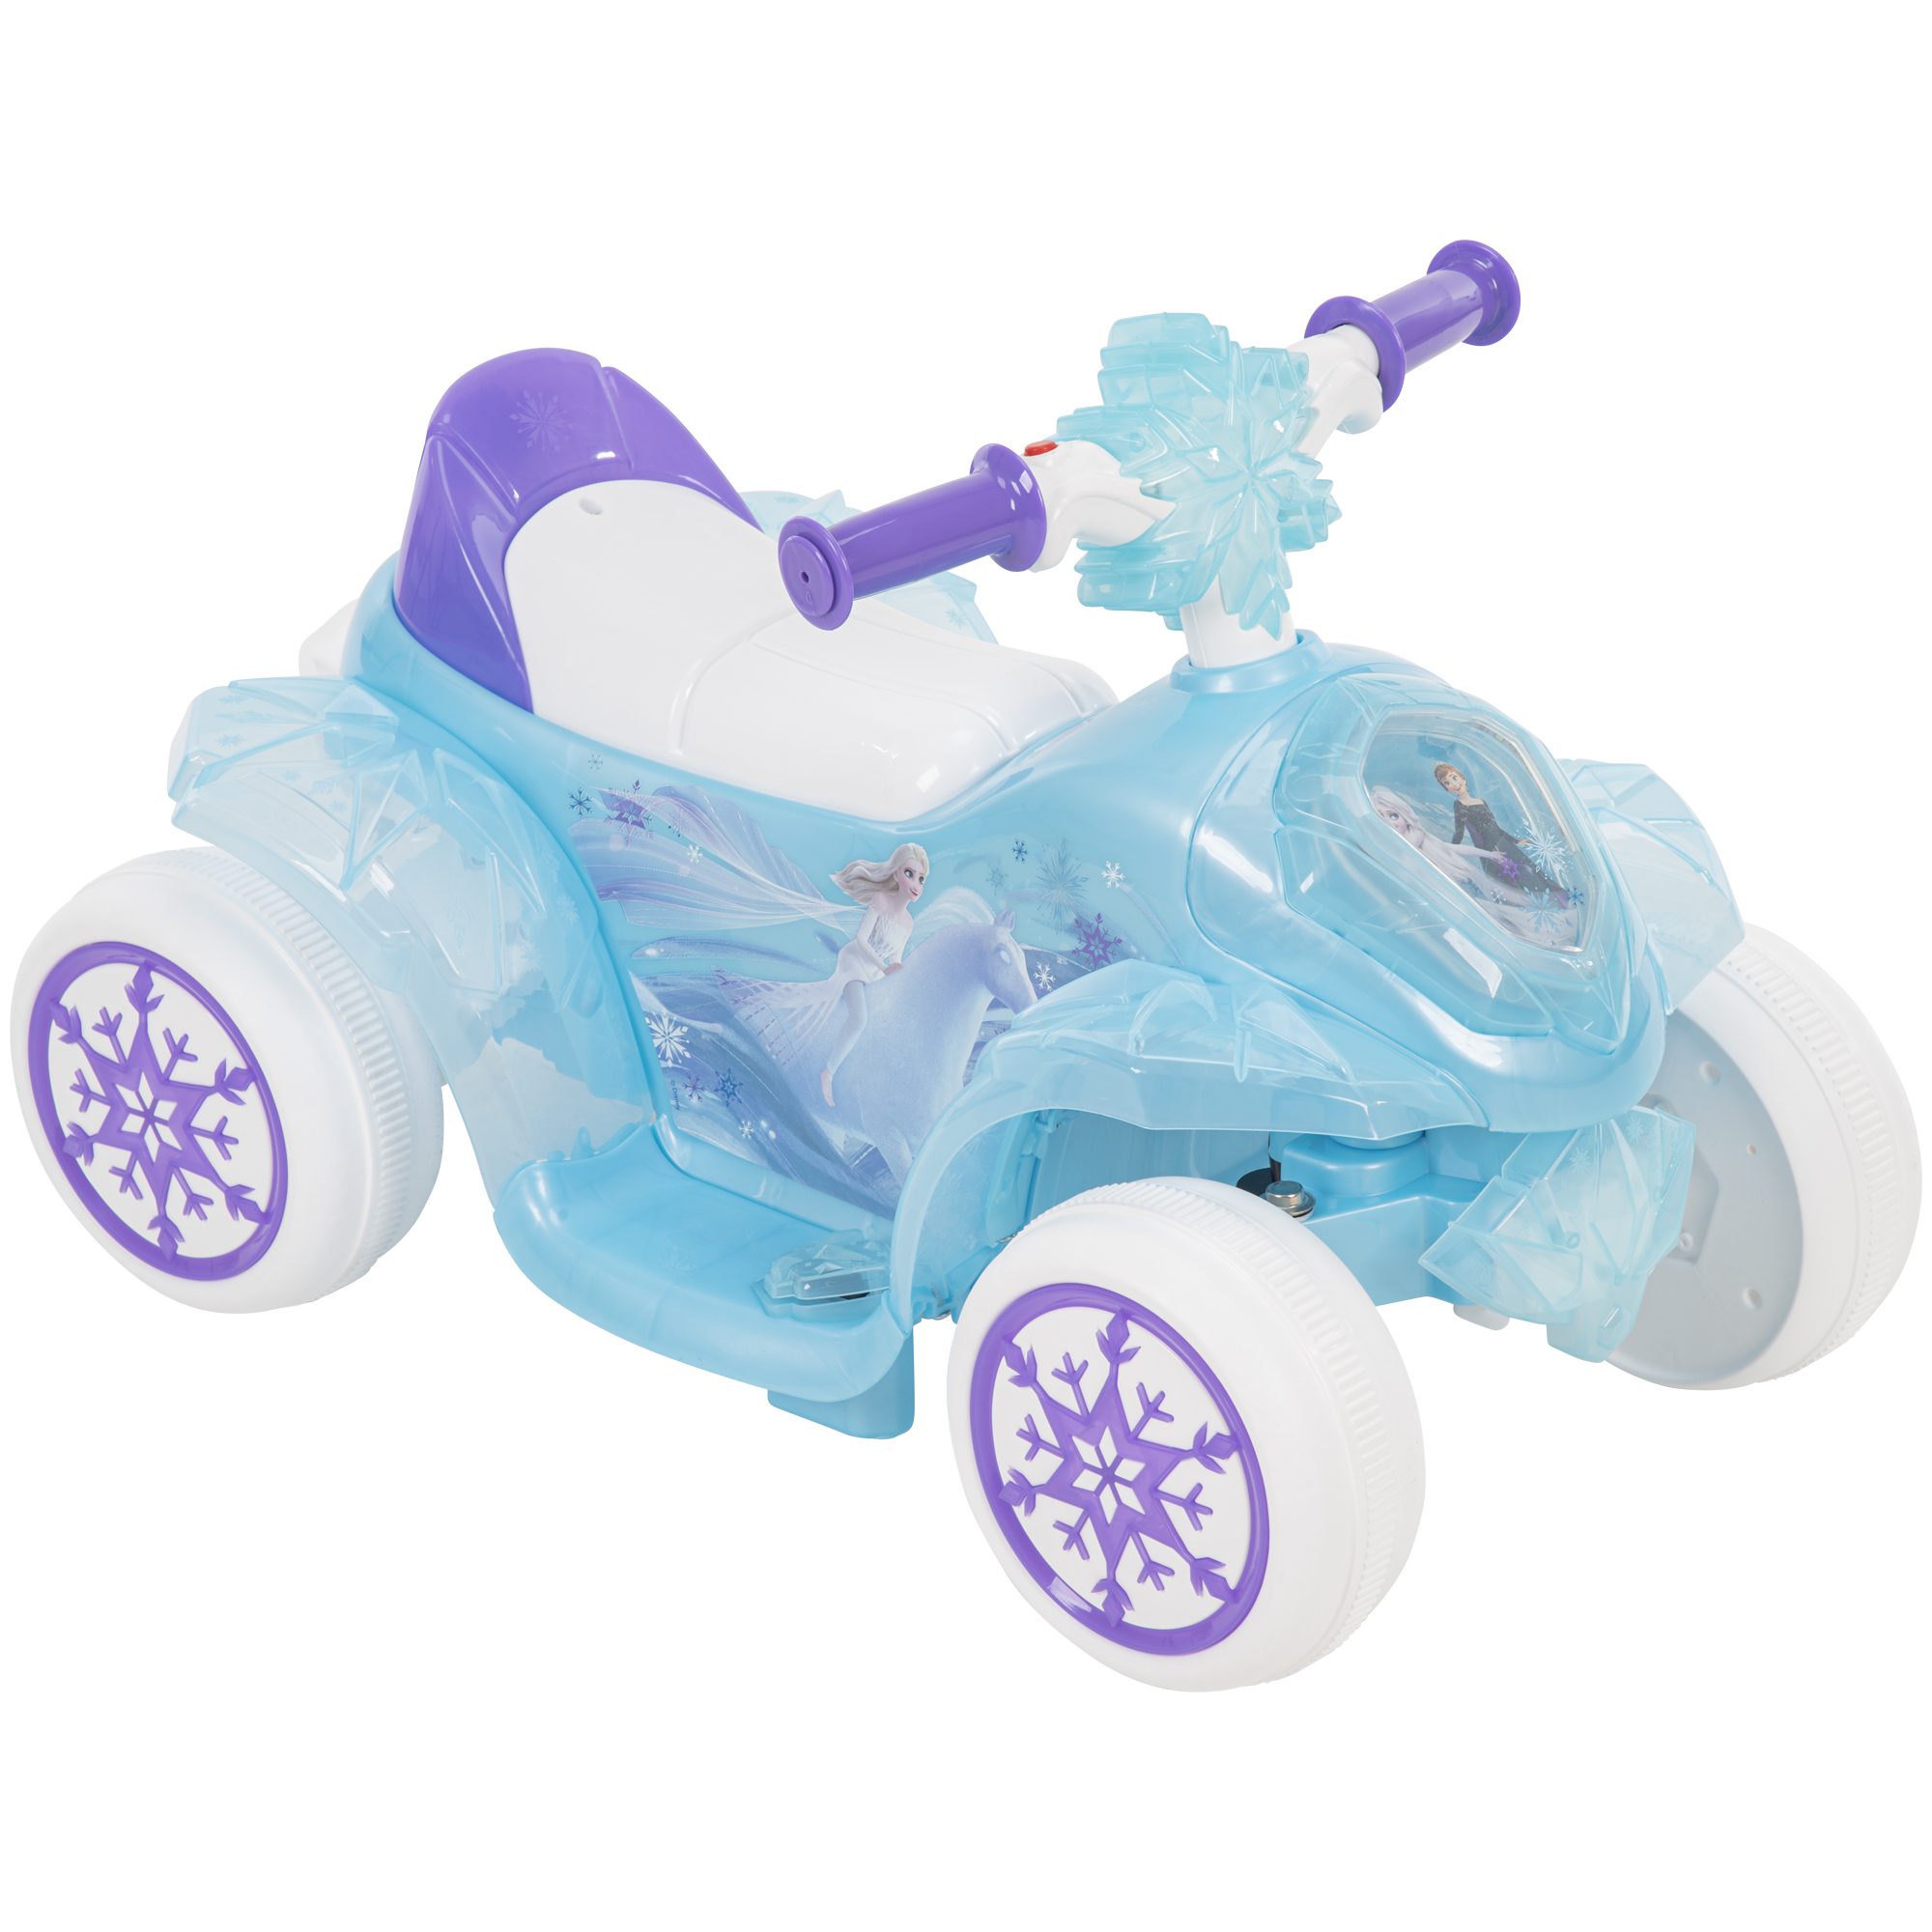 Disney Frozen 6 Volts Electric Ride-on Quad for Girls, Ages 1.5+ Years, by Huffy - image 4 of 15